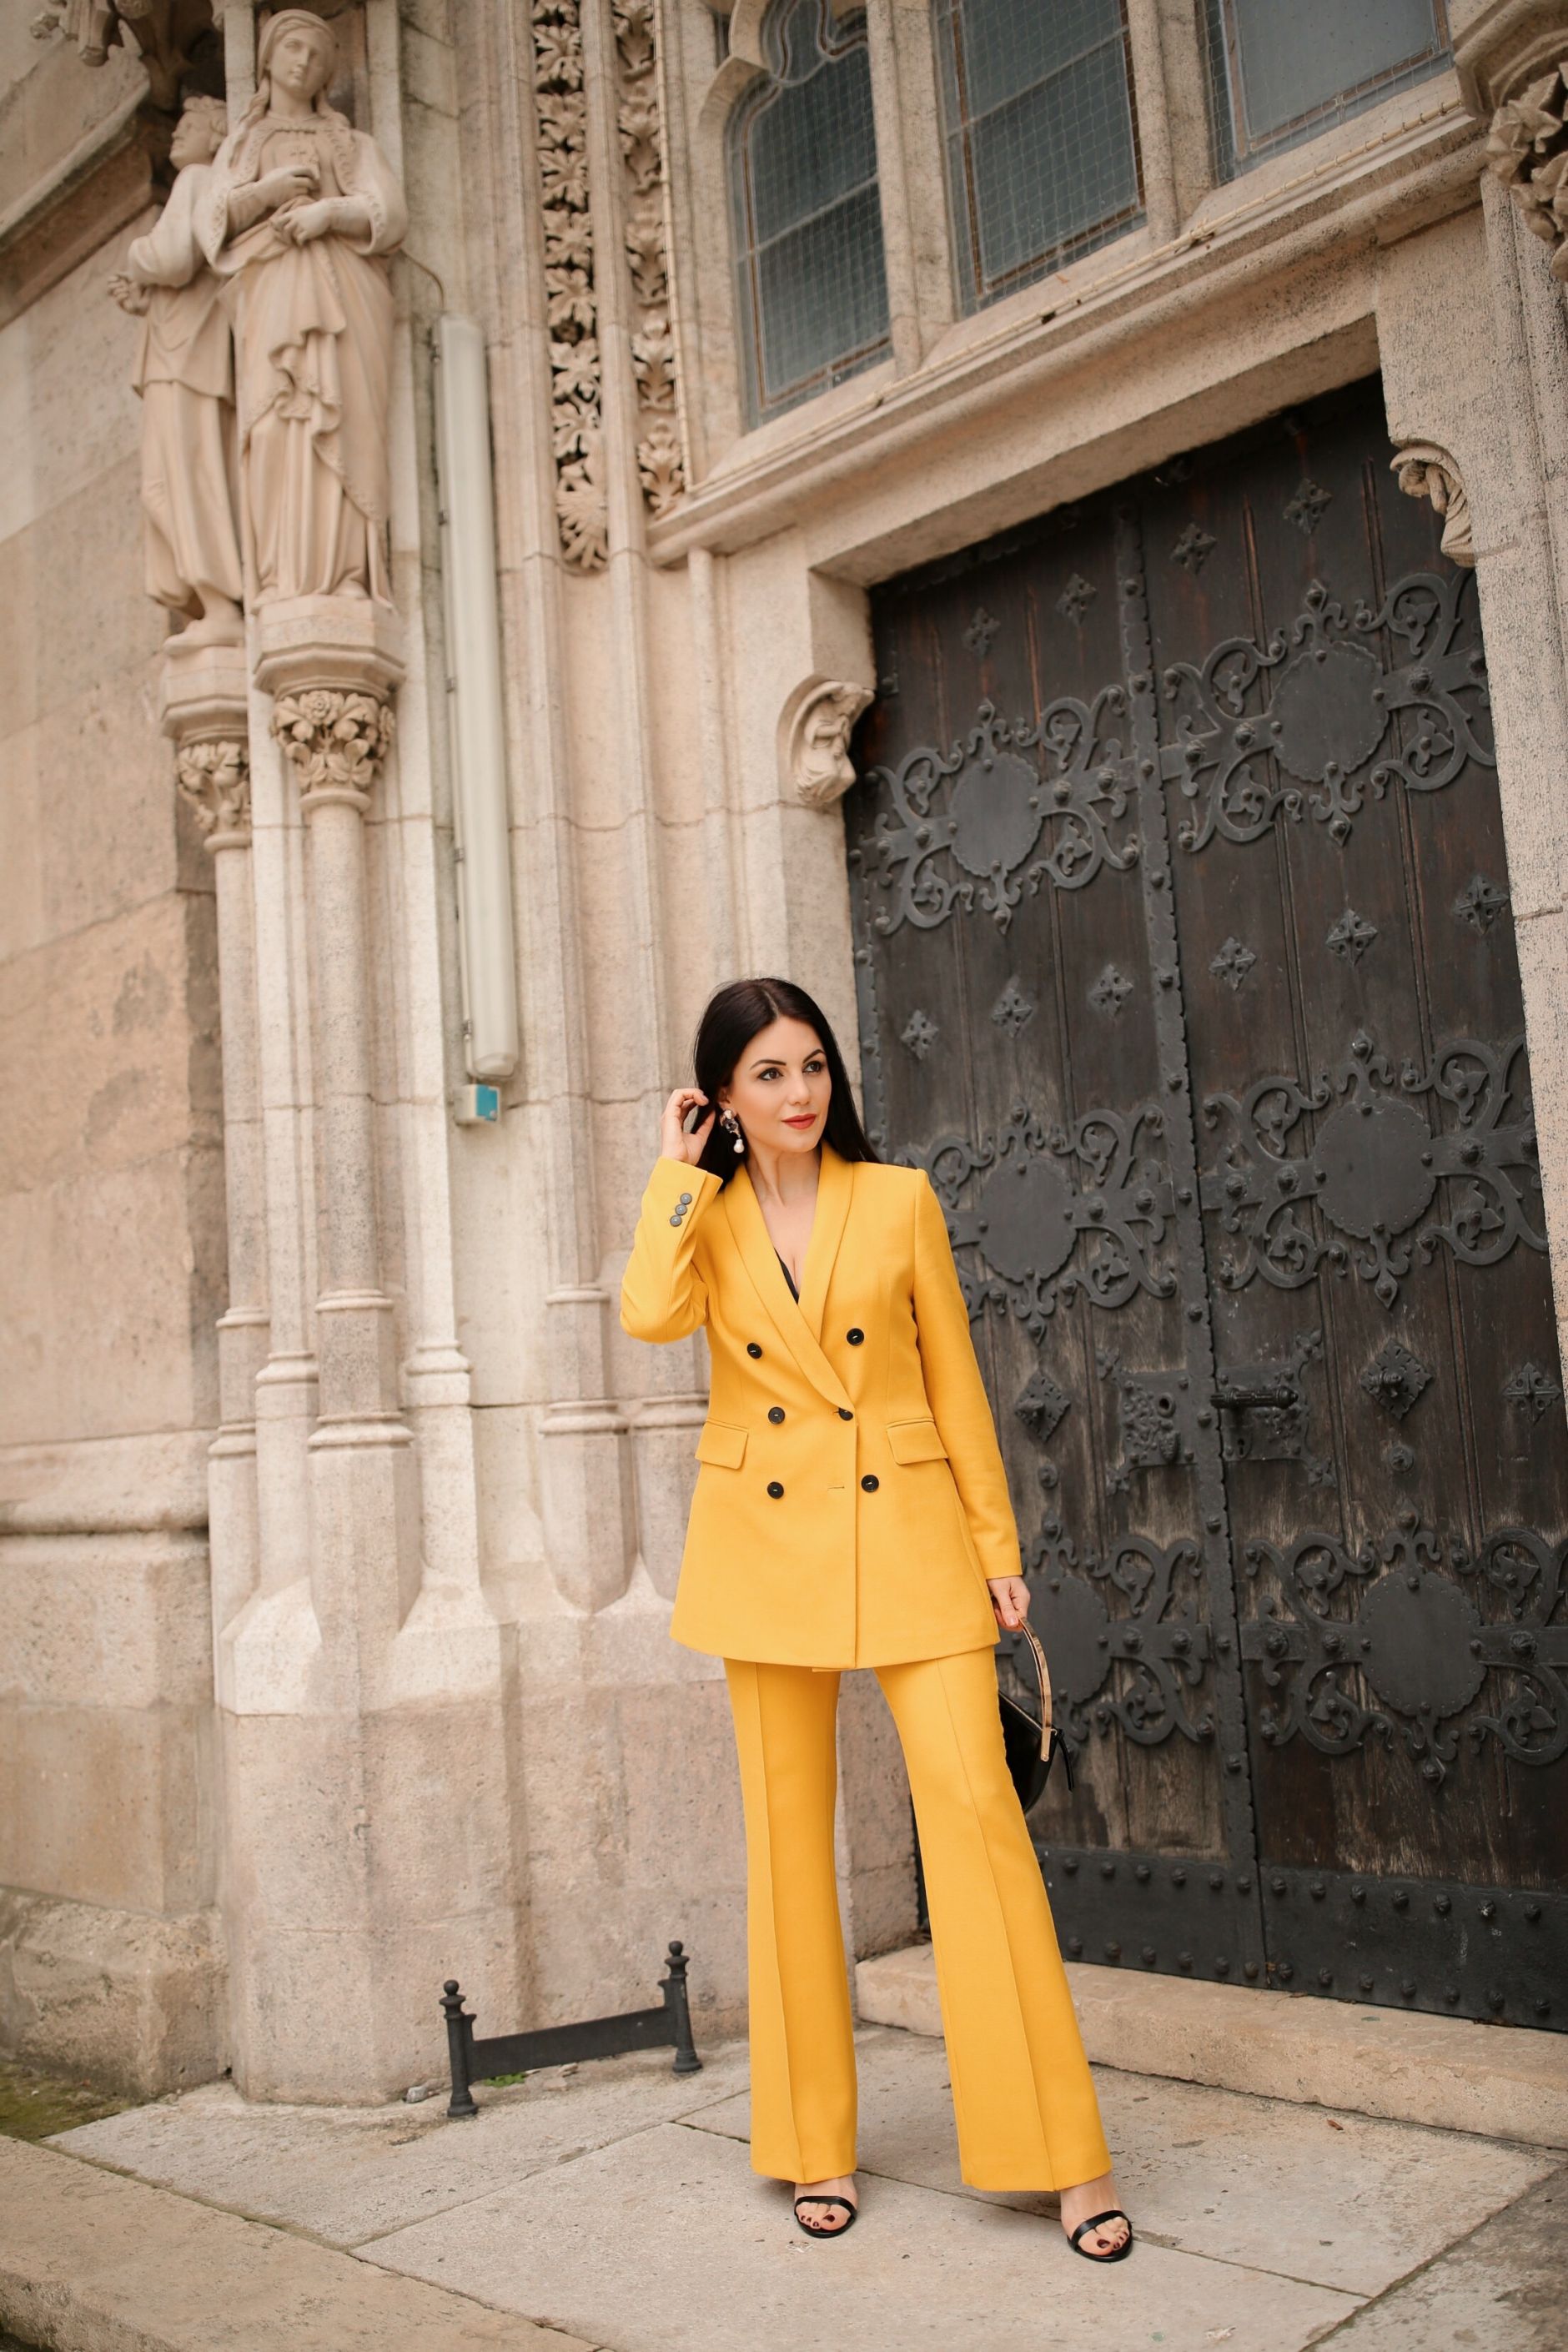 THE LOOK: YELLOW FROM AM TO PM